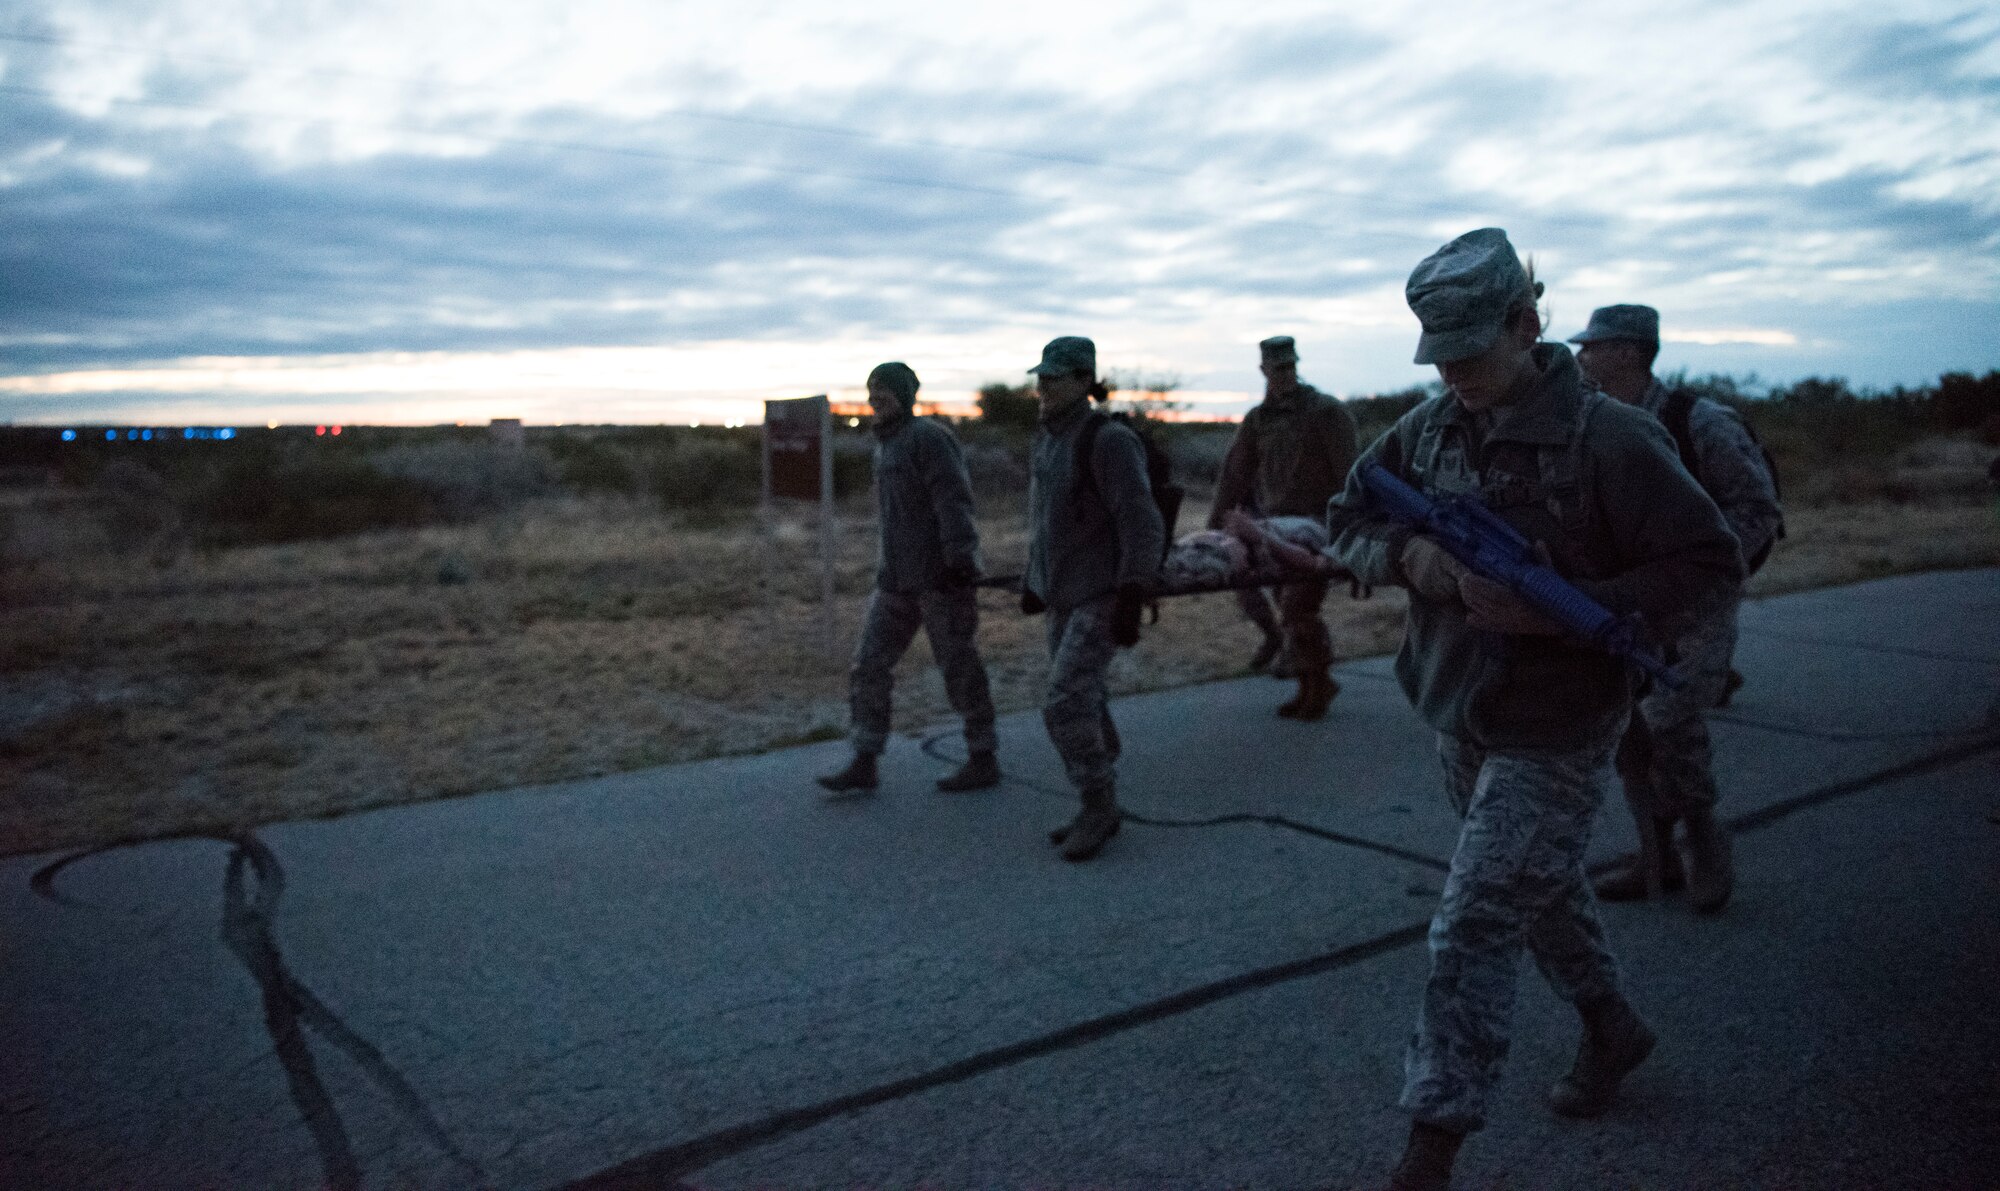 Tech Sgt. Michele Lazurka, 47th Operational Medical Readiness Squadron flight medicine office manager, escorts a team of medics to the exercise final destination at Laughlin Air Force Base, Texas, Oct. 25, 2019. The medics were faced with the challenge of extracting the casualties in less than an hour back to the starting point. (U.S. Air Force photo by Senior Airman Marco A. Gomez)